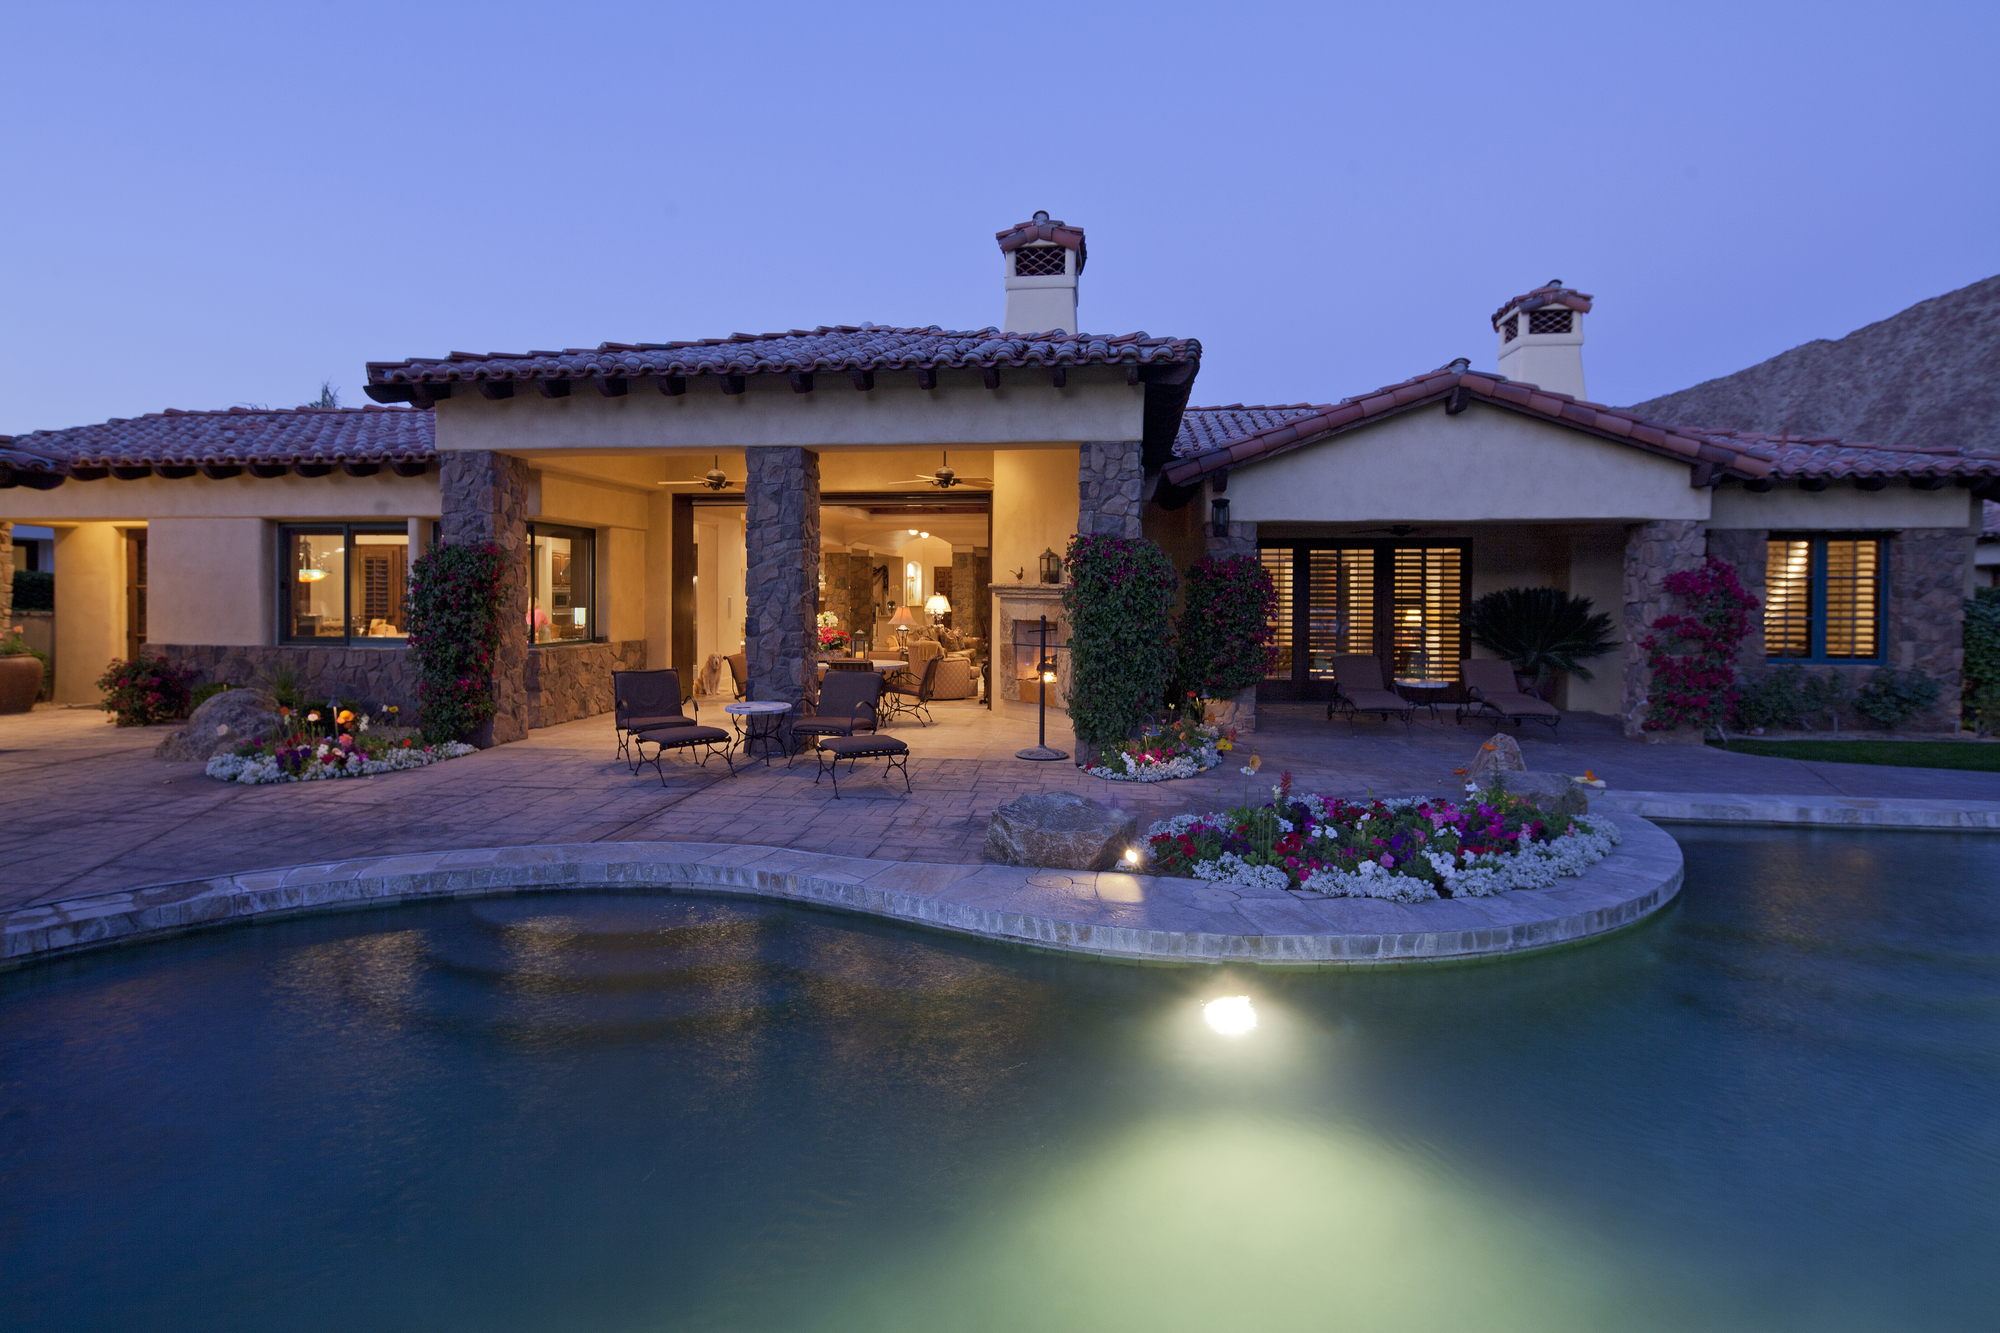 Luxury home with outdoor pool and patio area at twilight